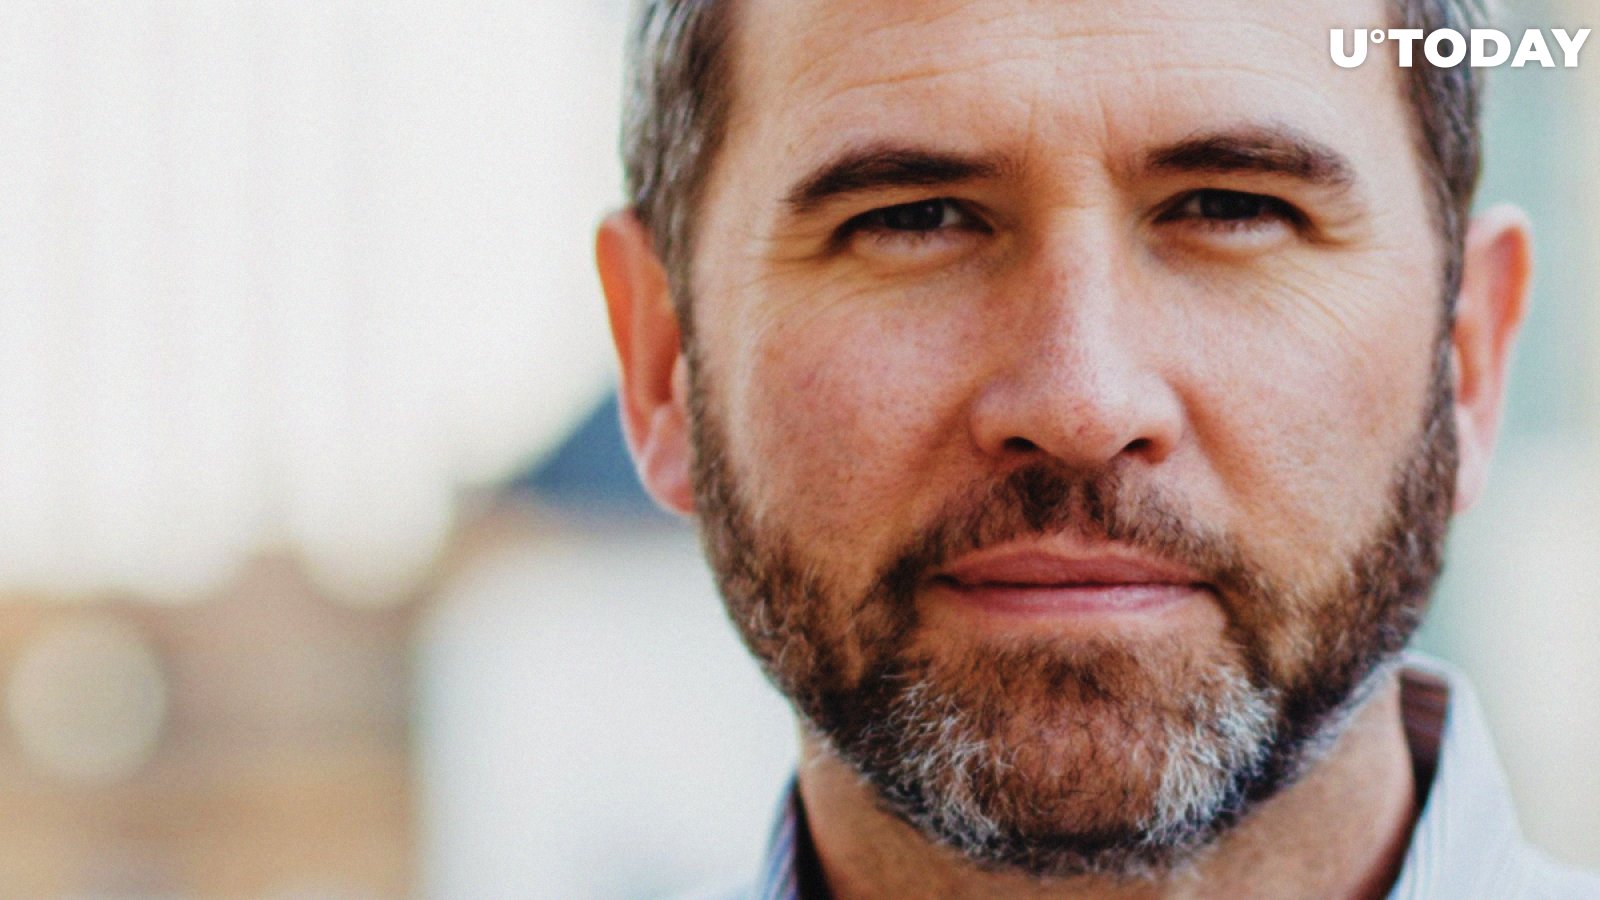 XRP Powered 7.5% of All USD/MXN Transactions Last Week Alone: Brad Garlinghouse